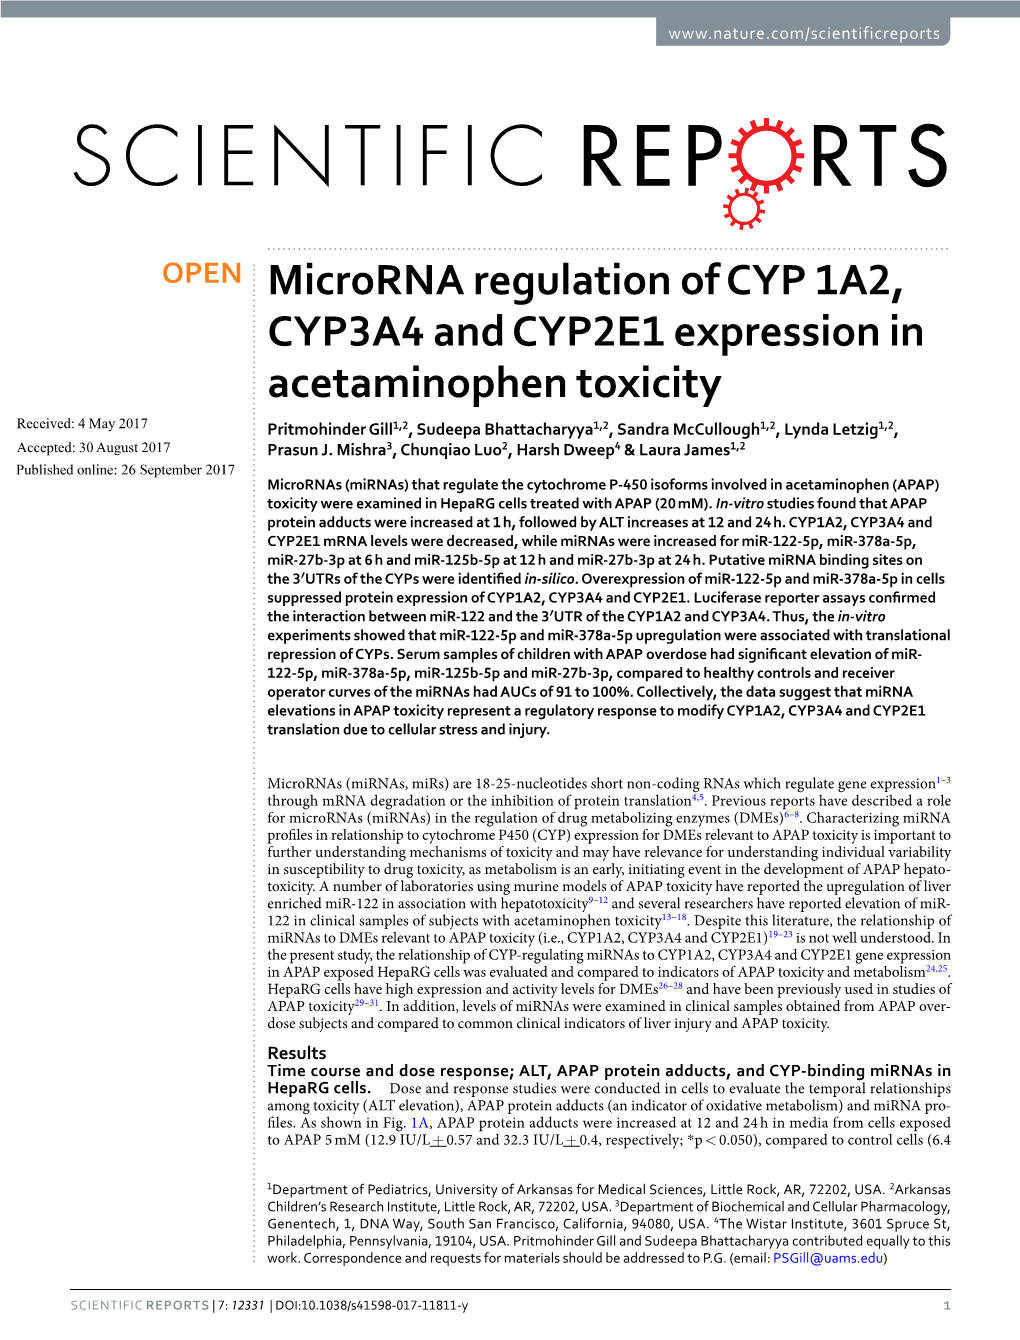 Microrna Regulation of CYP 1A2, CYP3A4 and CYP2E1 Expression in Acetaminophen Toxicity